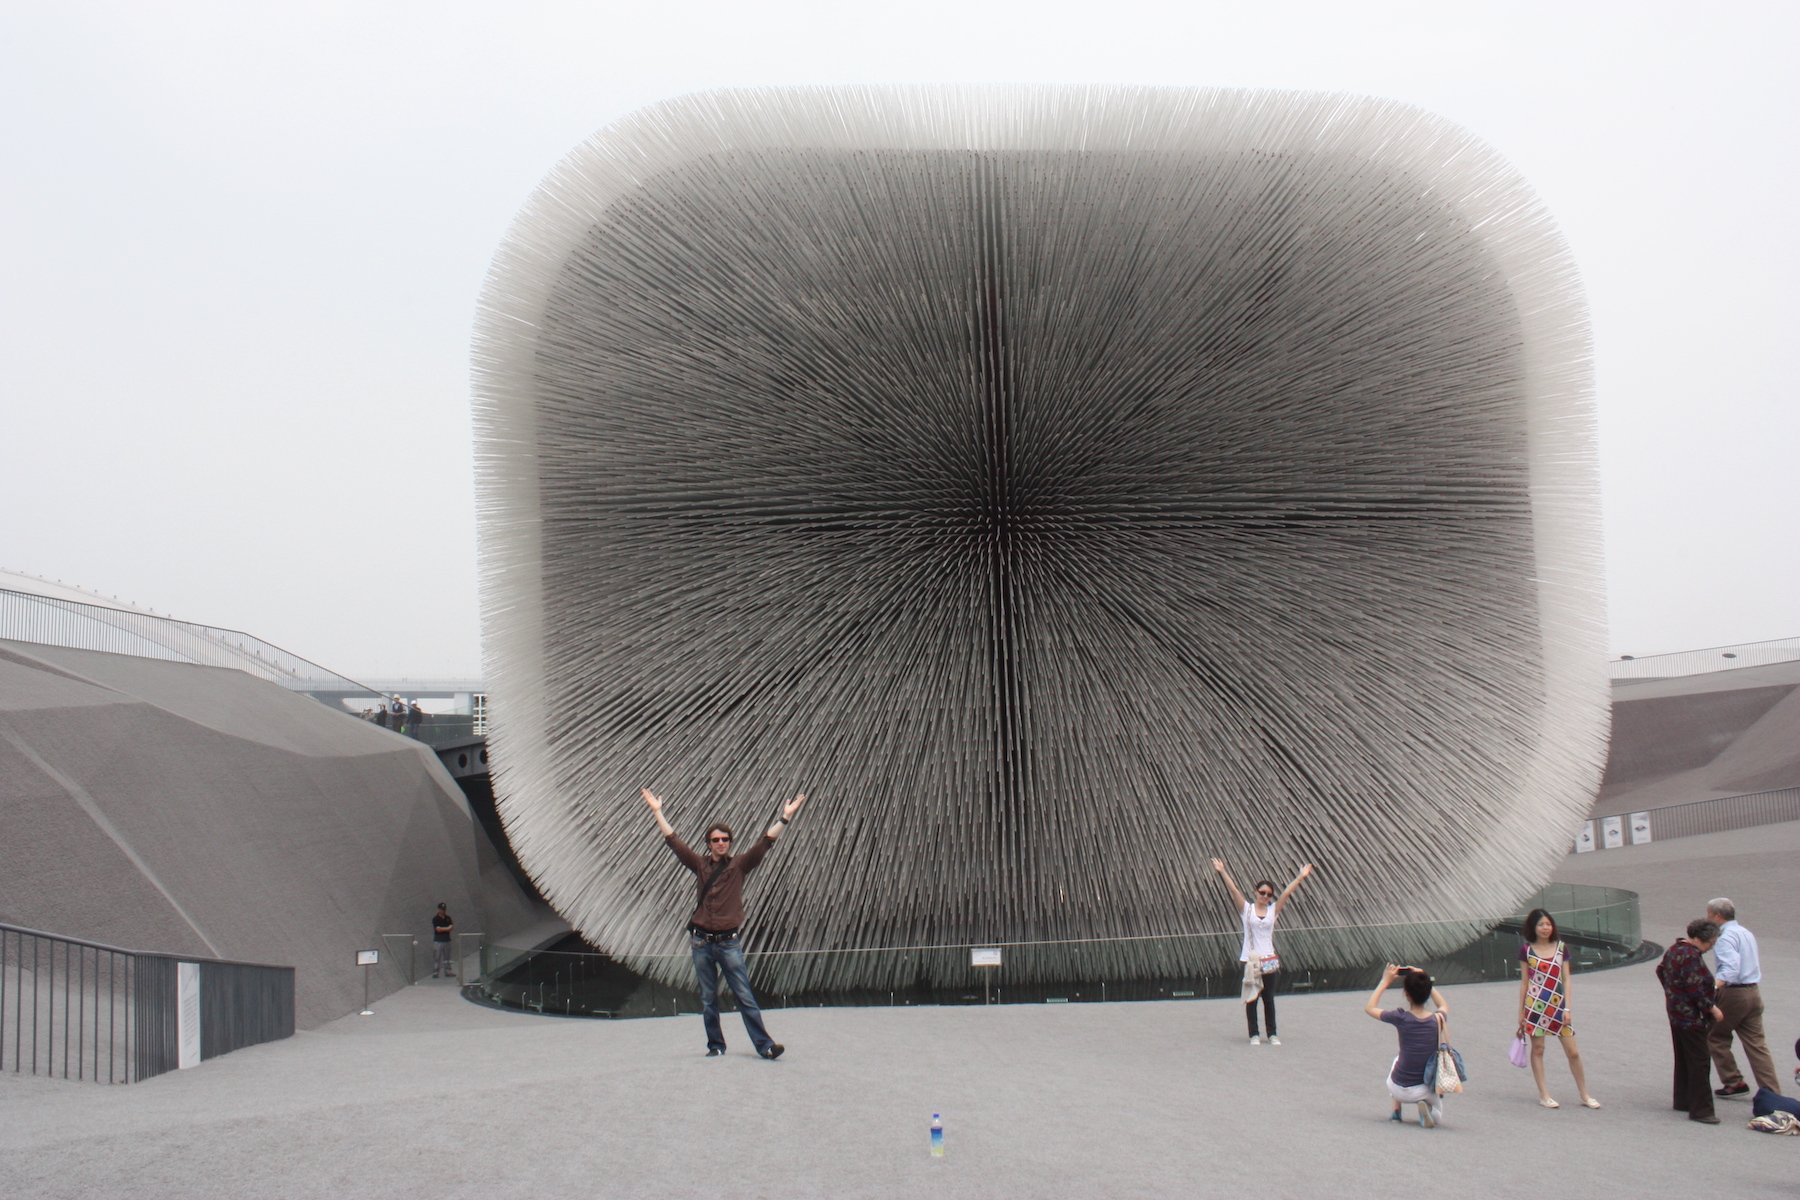 frog - The Seed Cathedral at the Shanghai World Expo